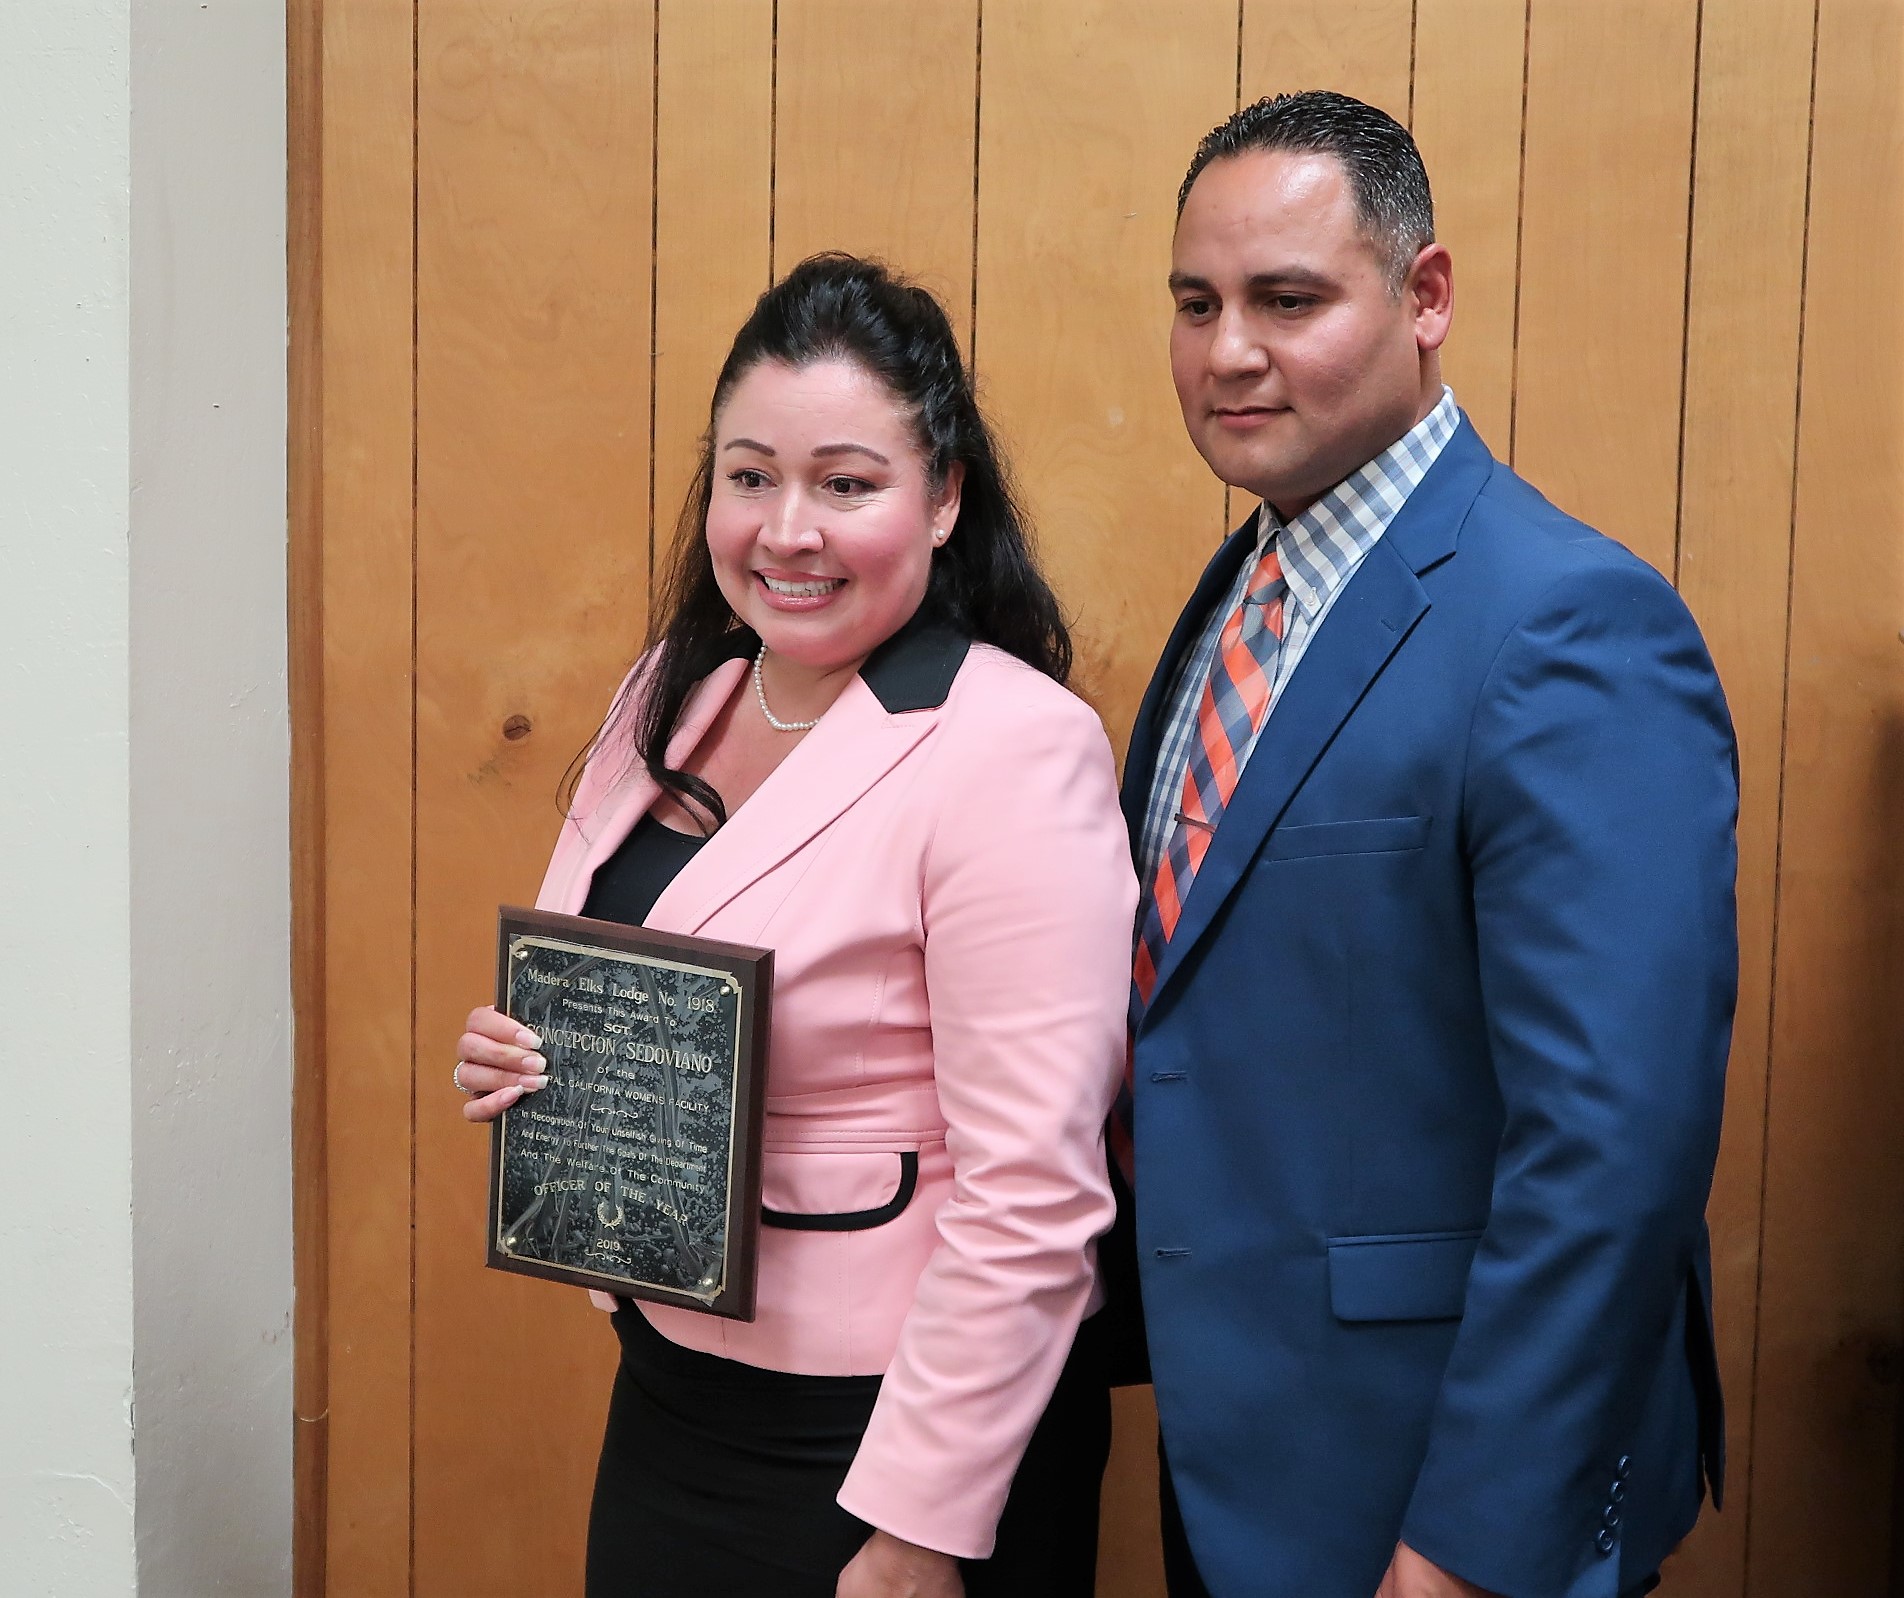 Woman in pink blazer and man in suit and tie pose for a photo. She is holding a plaque.